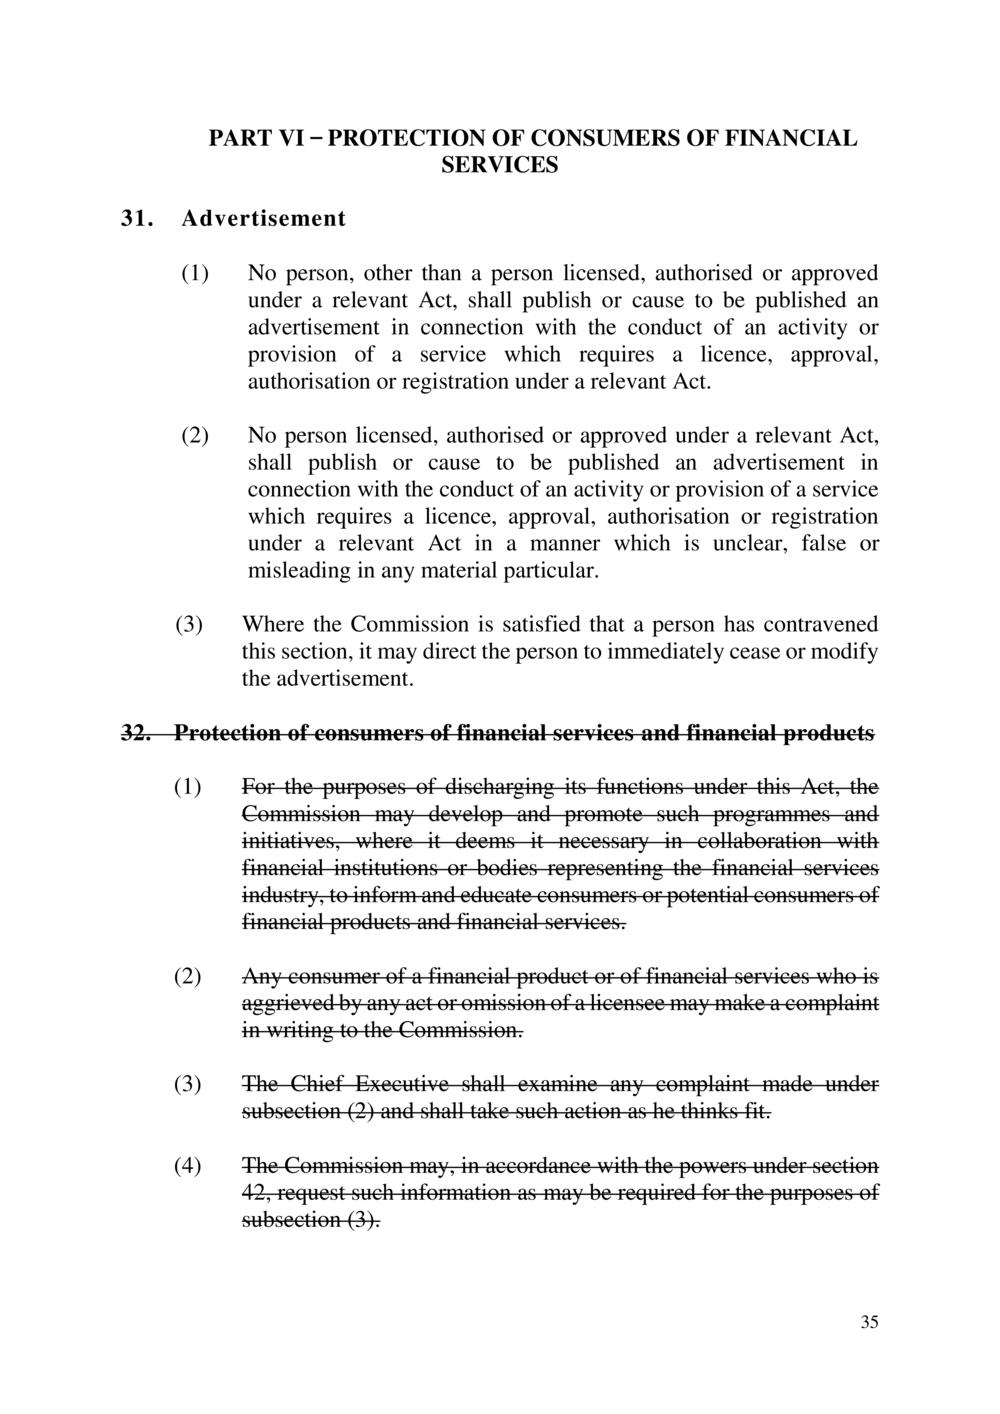 The Financial Services Act